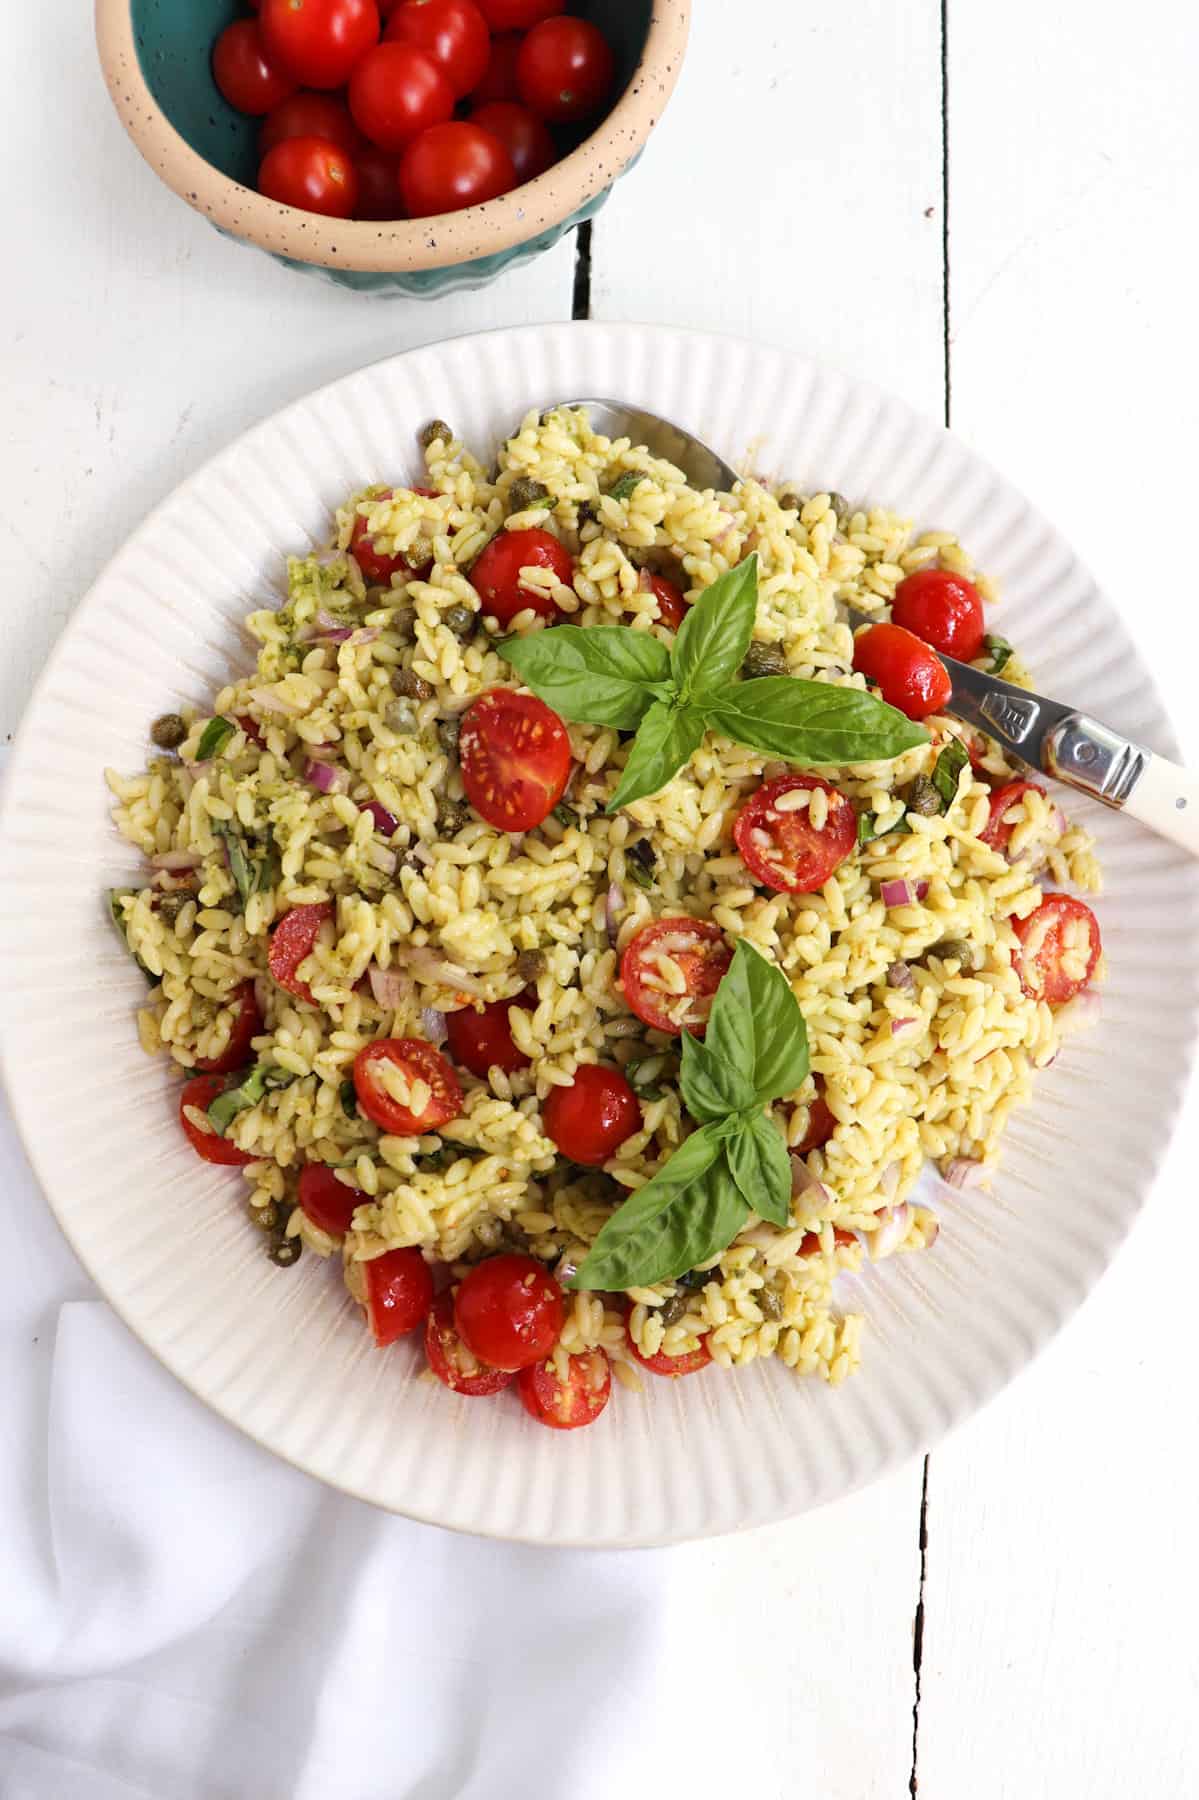 orzo pesto salad with tomatoes in a bowl on top and a white towel beneath.